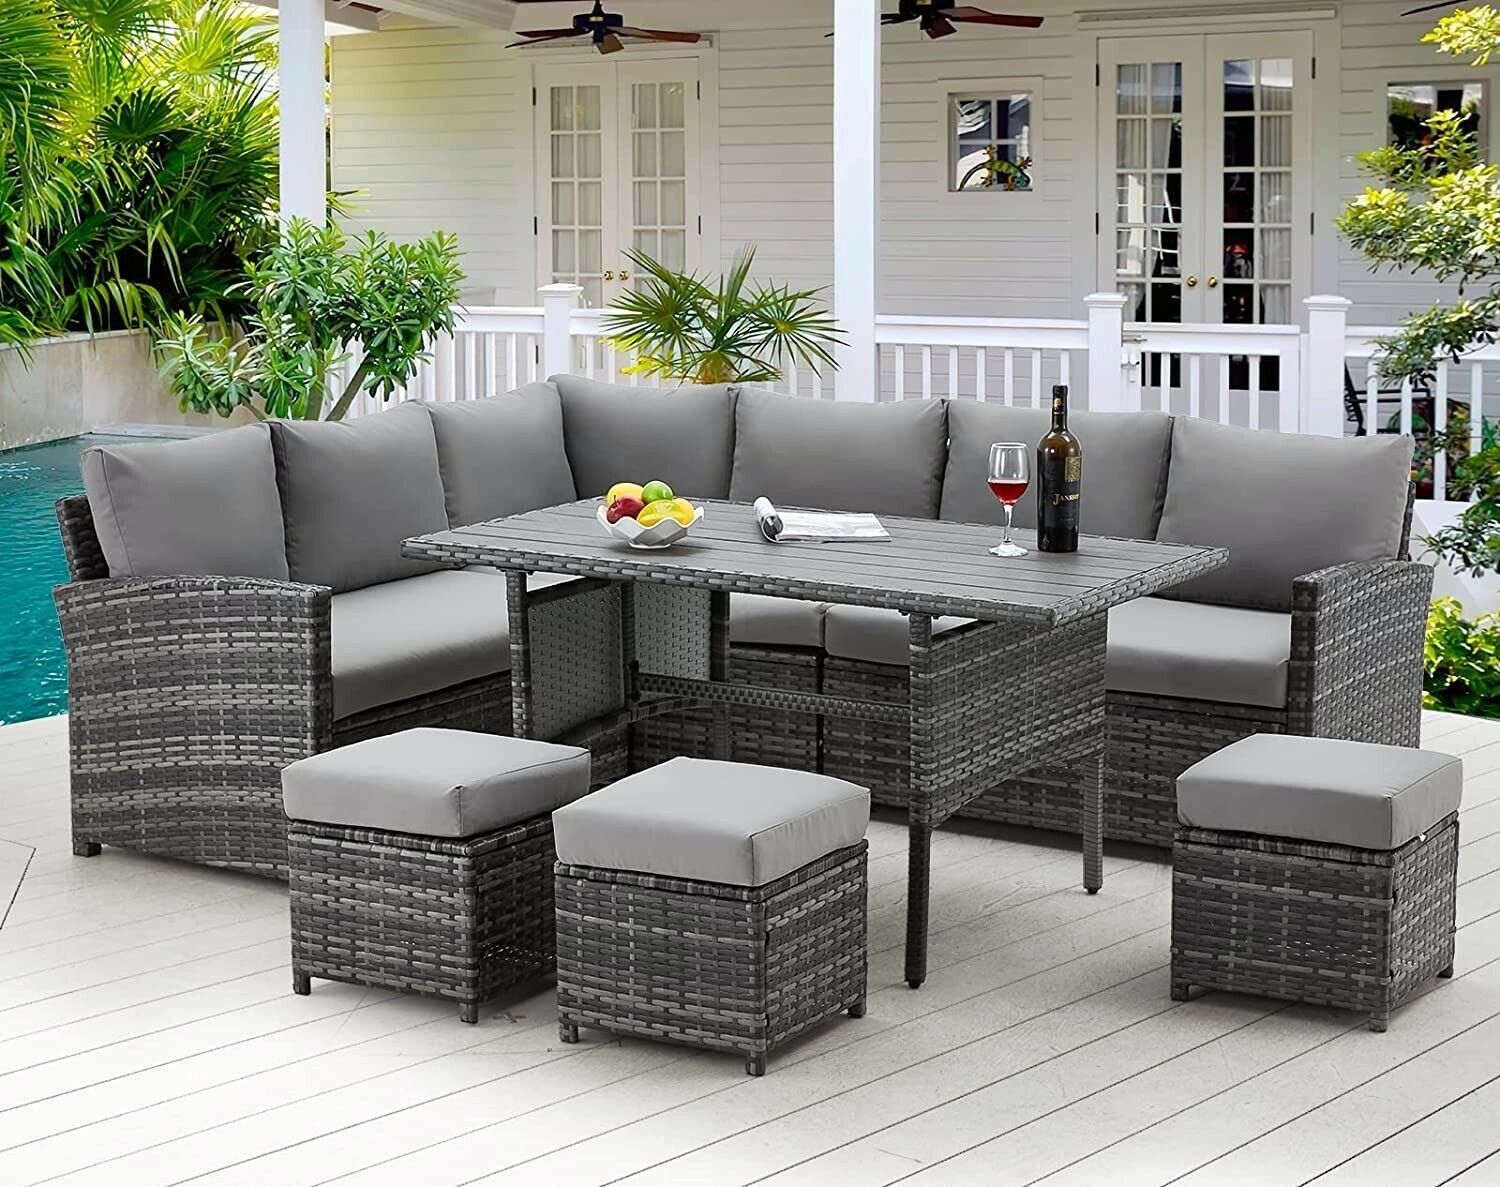 Sets 7-pieces Outdoor Sectional Sofa Rattan Wicker Sofa W/ T